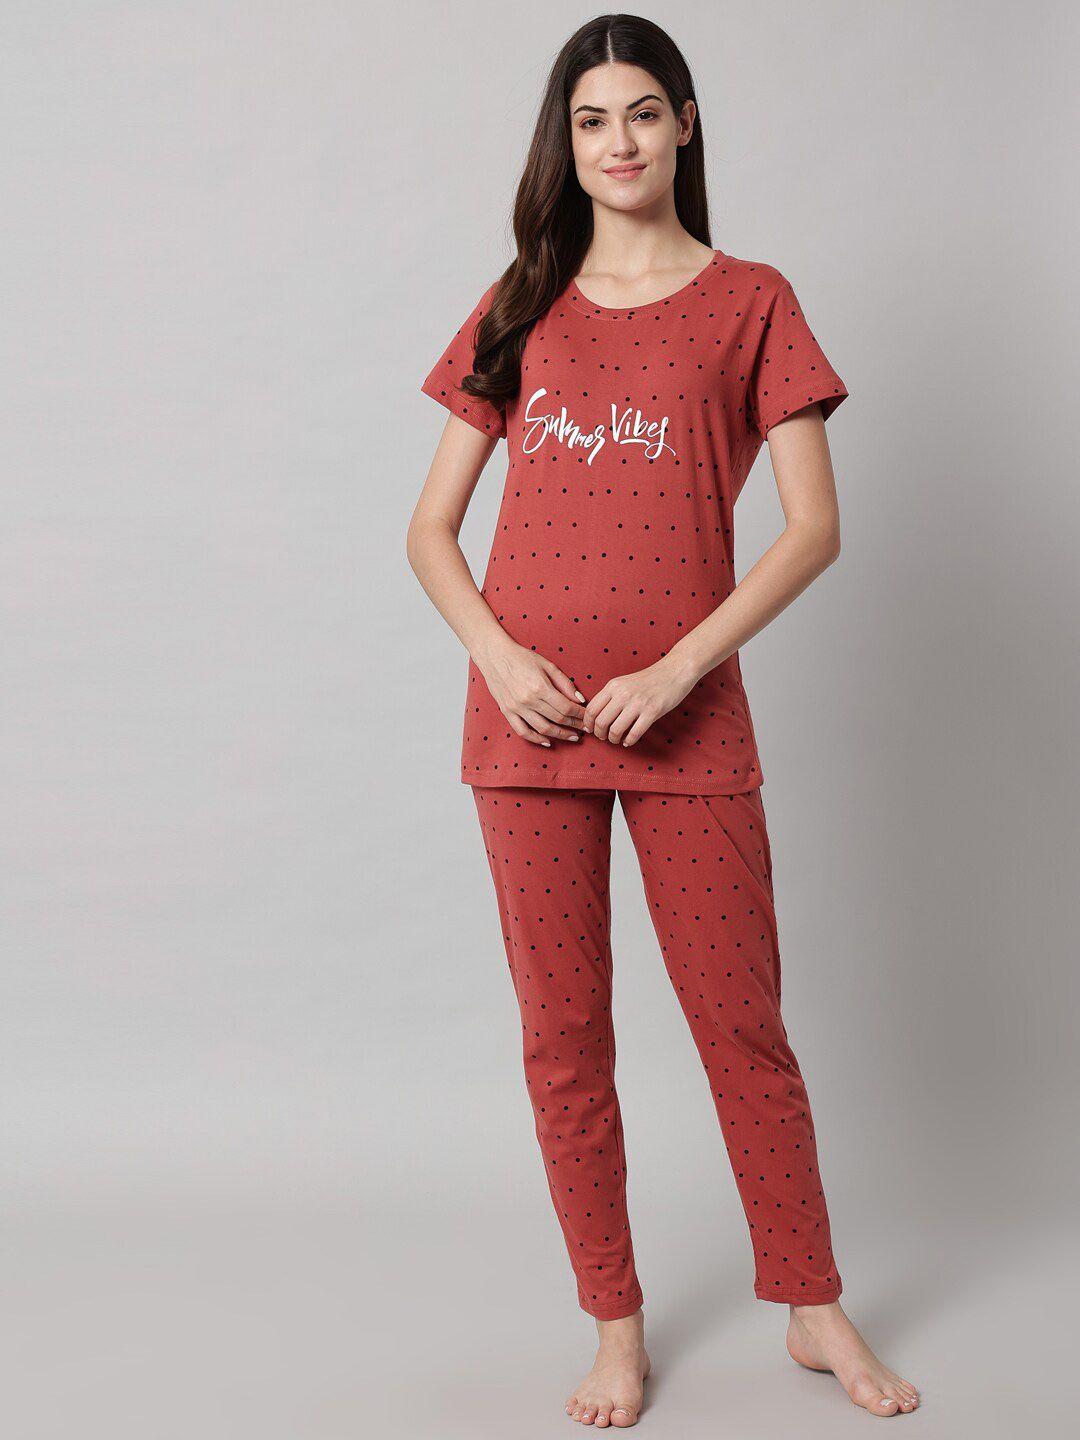 SEPHANI Polka Dots Printed Pure Cotton Night Suit